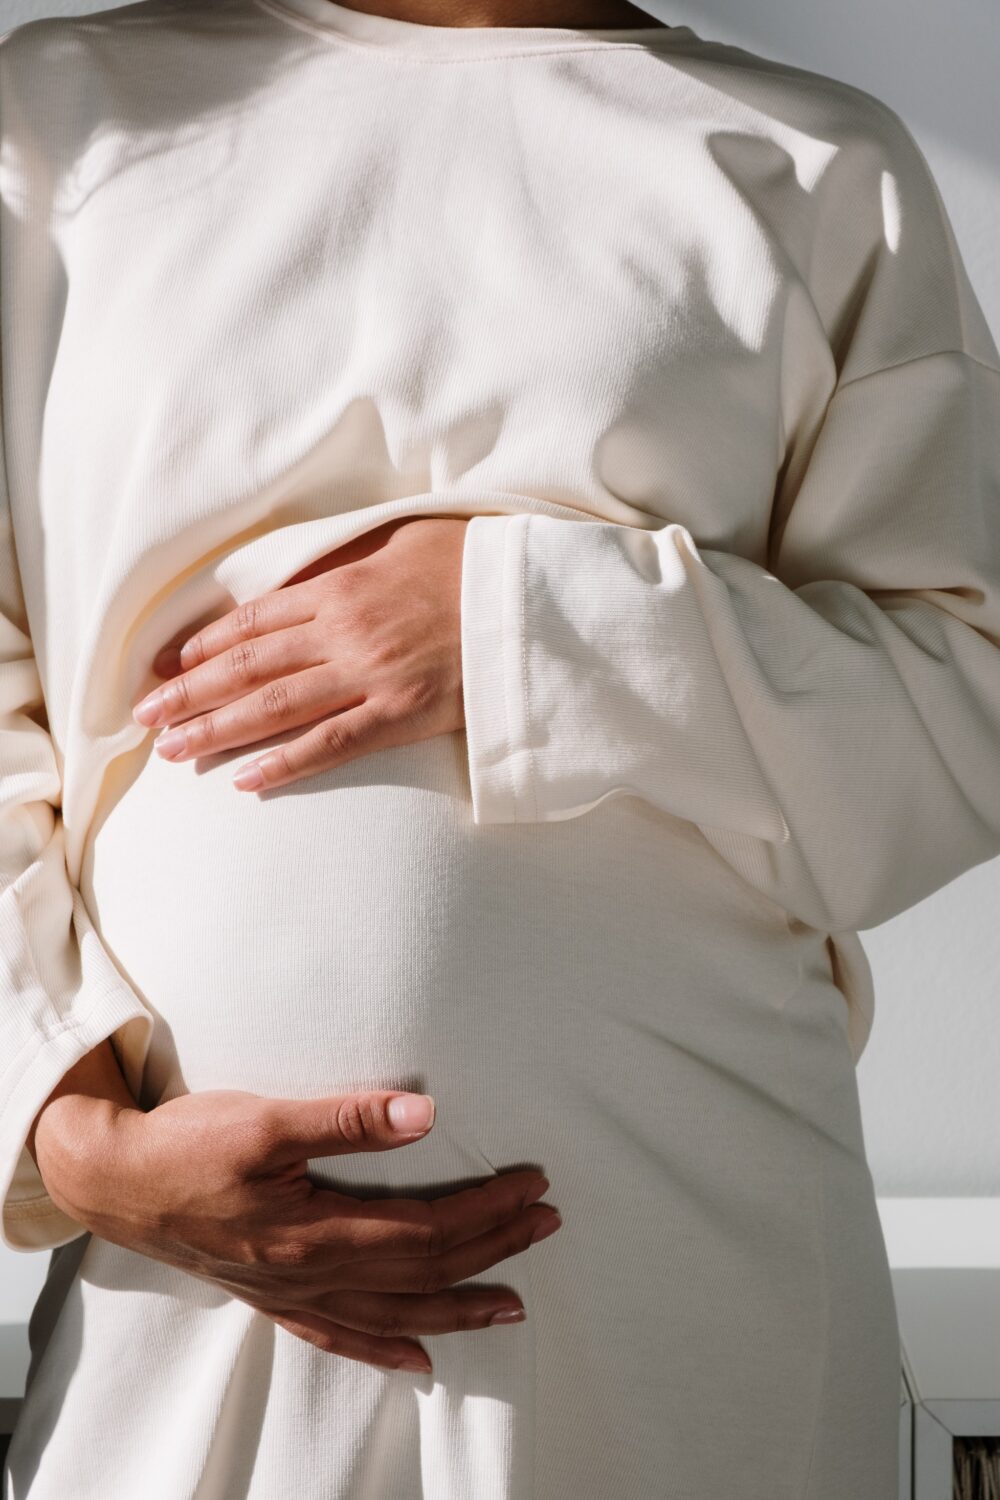 pregnant woman holding their belly with a white dress on, their face not visible